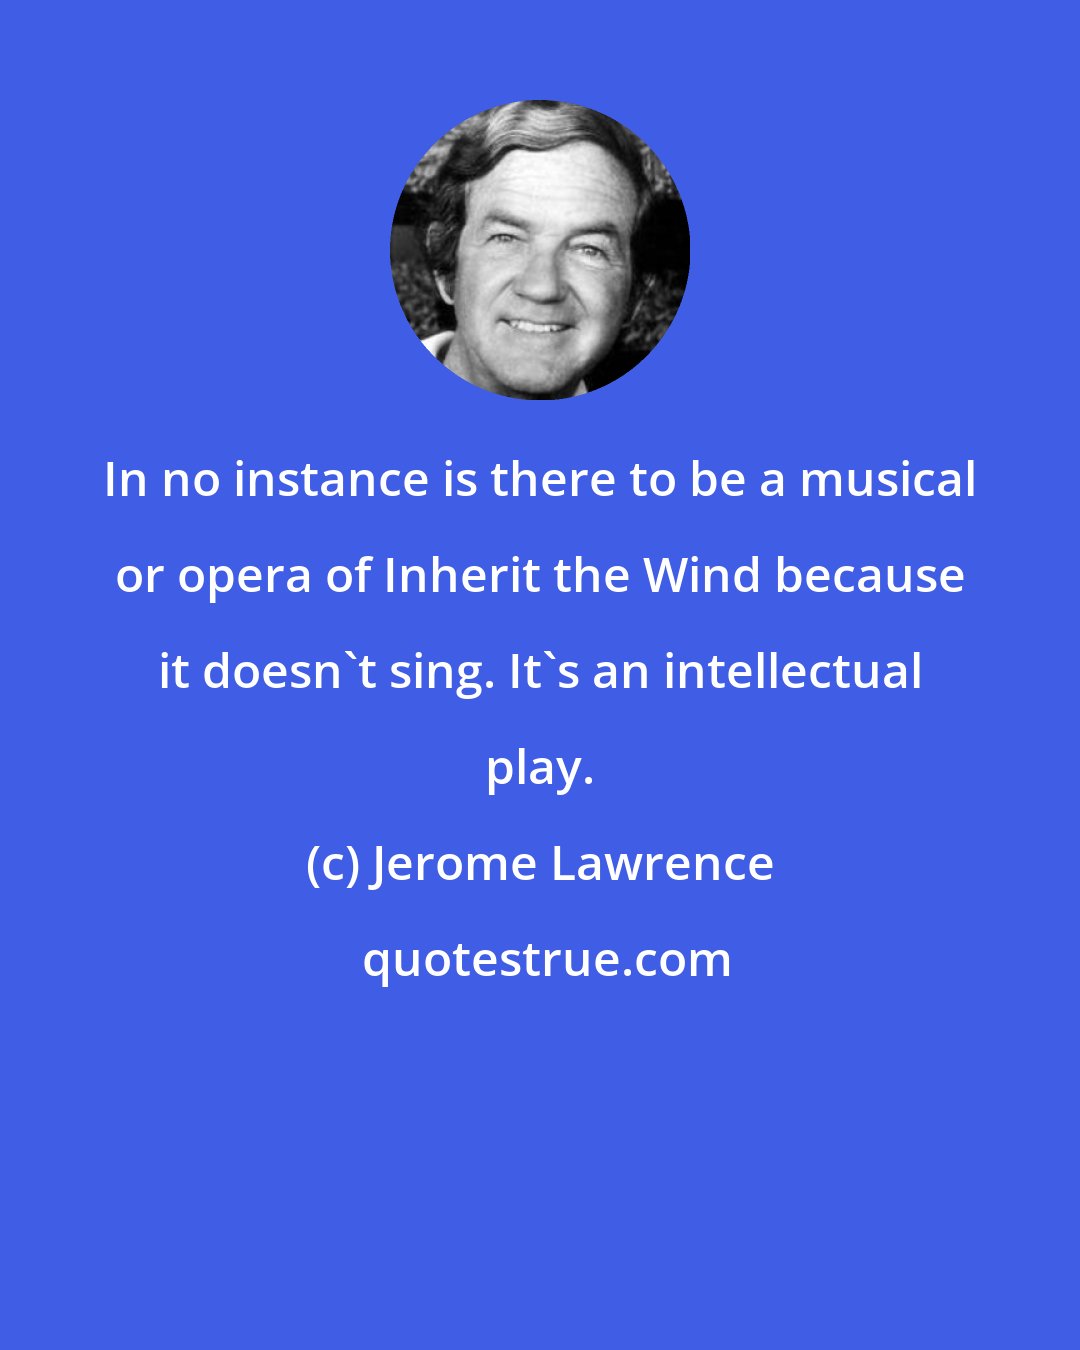 Jerome Lawrence: In no instance is there to be a musical or opera of Inherit the Wind because it doesn't sing. It's an intellectual play.